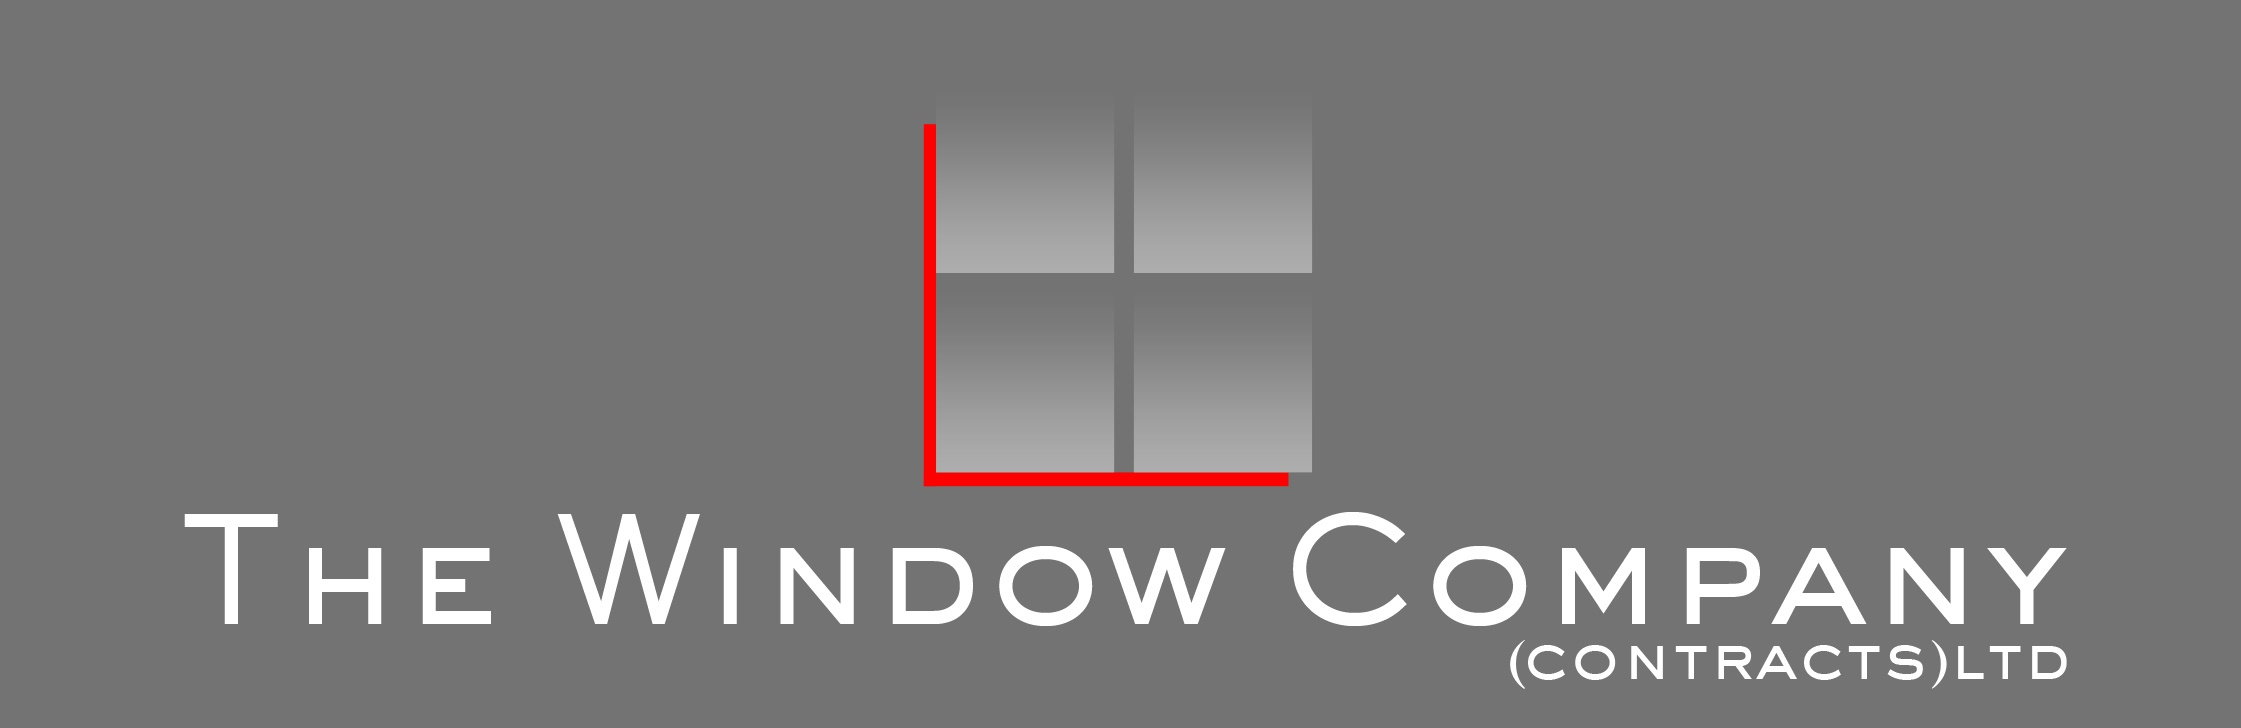 logo for The Window Company (Contracts) Ltd